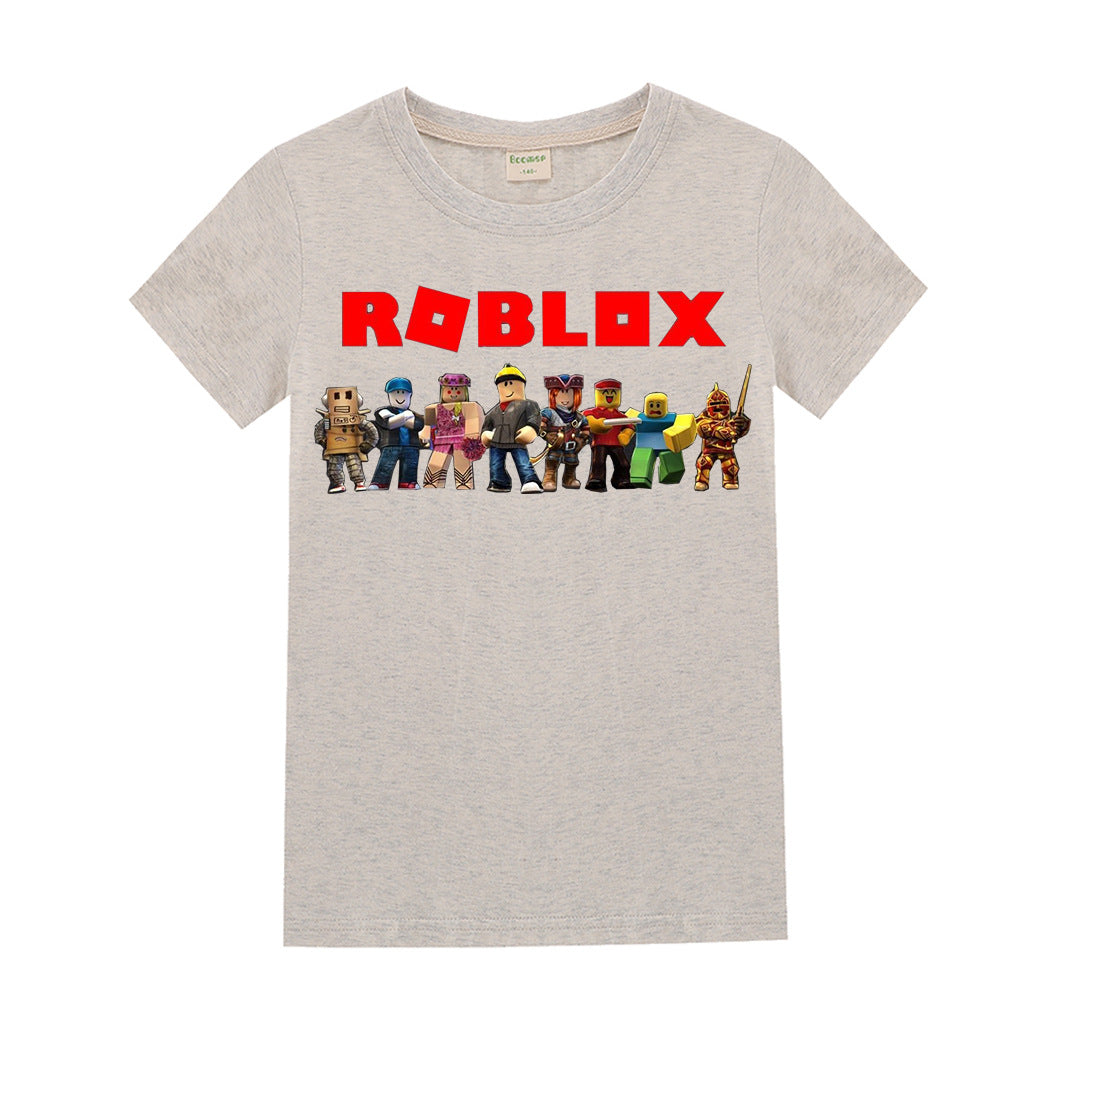 Roblox T Shirt For Boys And Girls Nfgoods - roblox ad size top